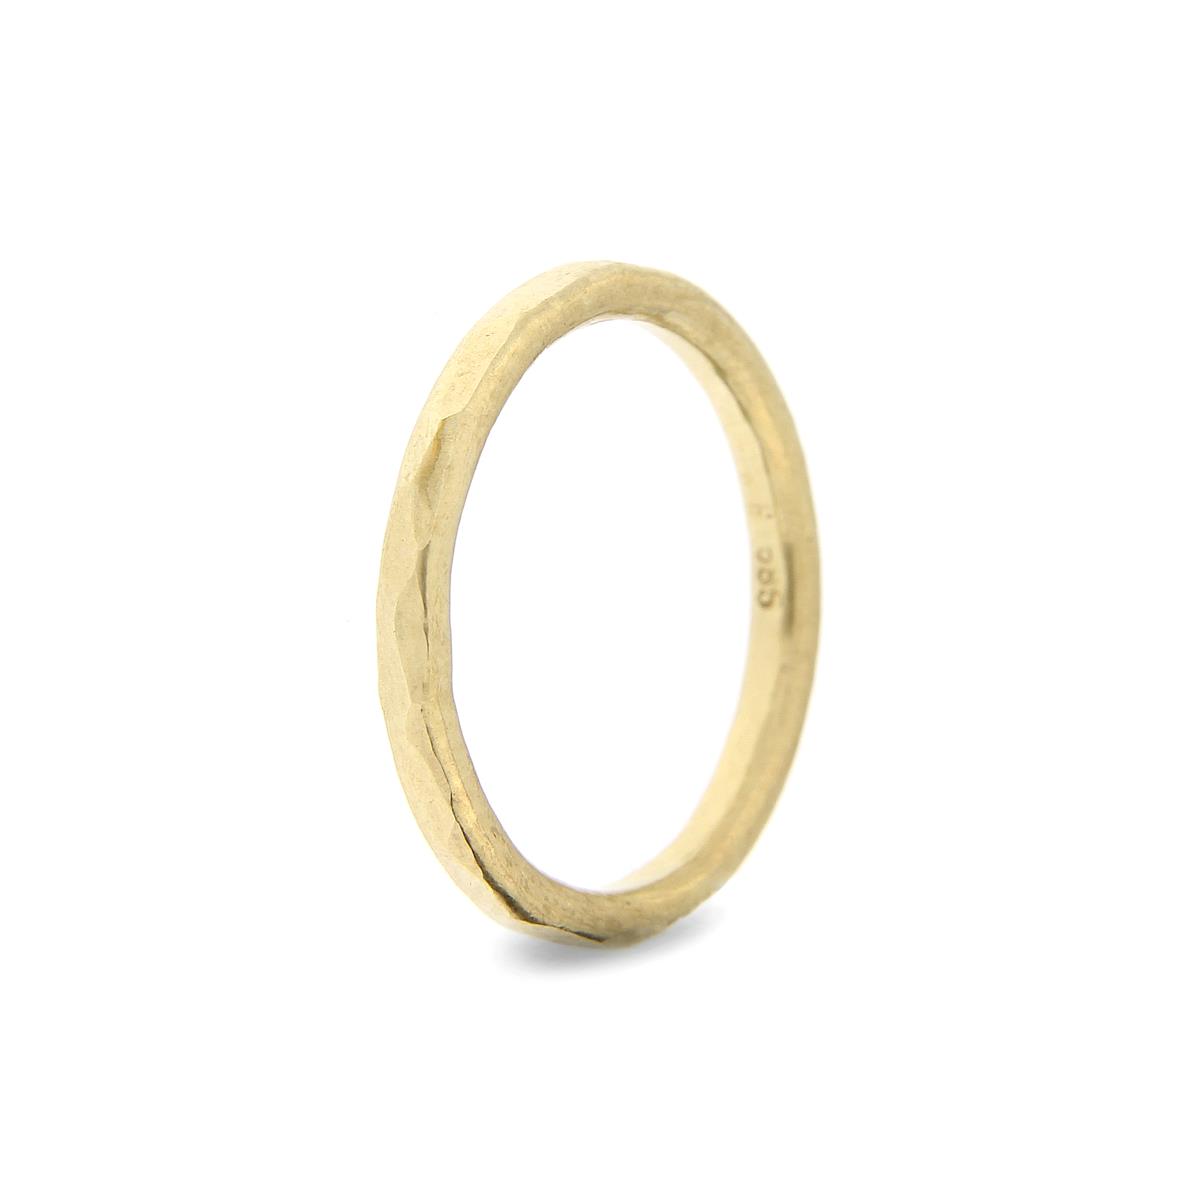 Katie g. Jewellery - Hammered Ring 2,0mm - Champ Gold_2